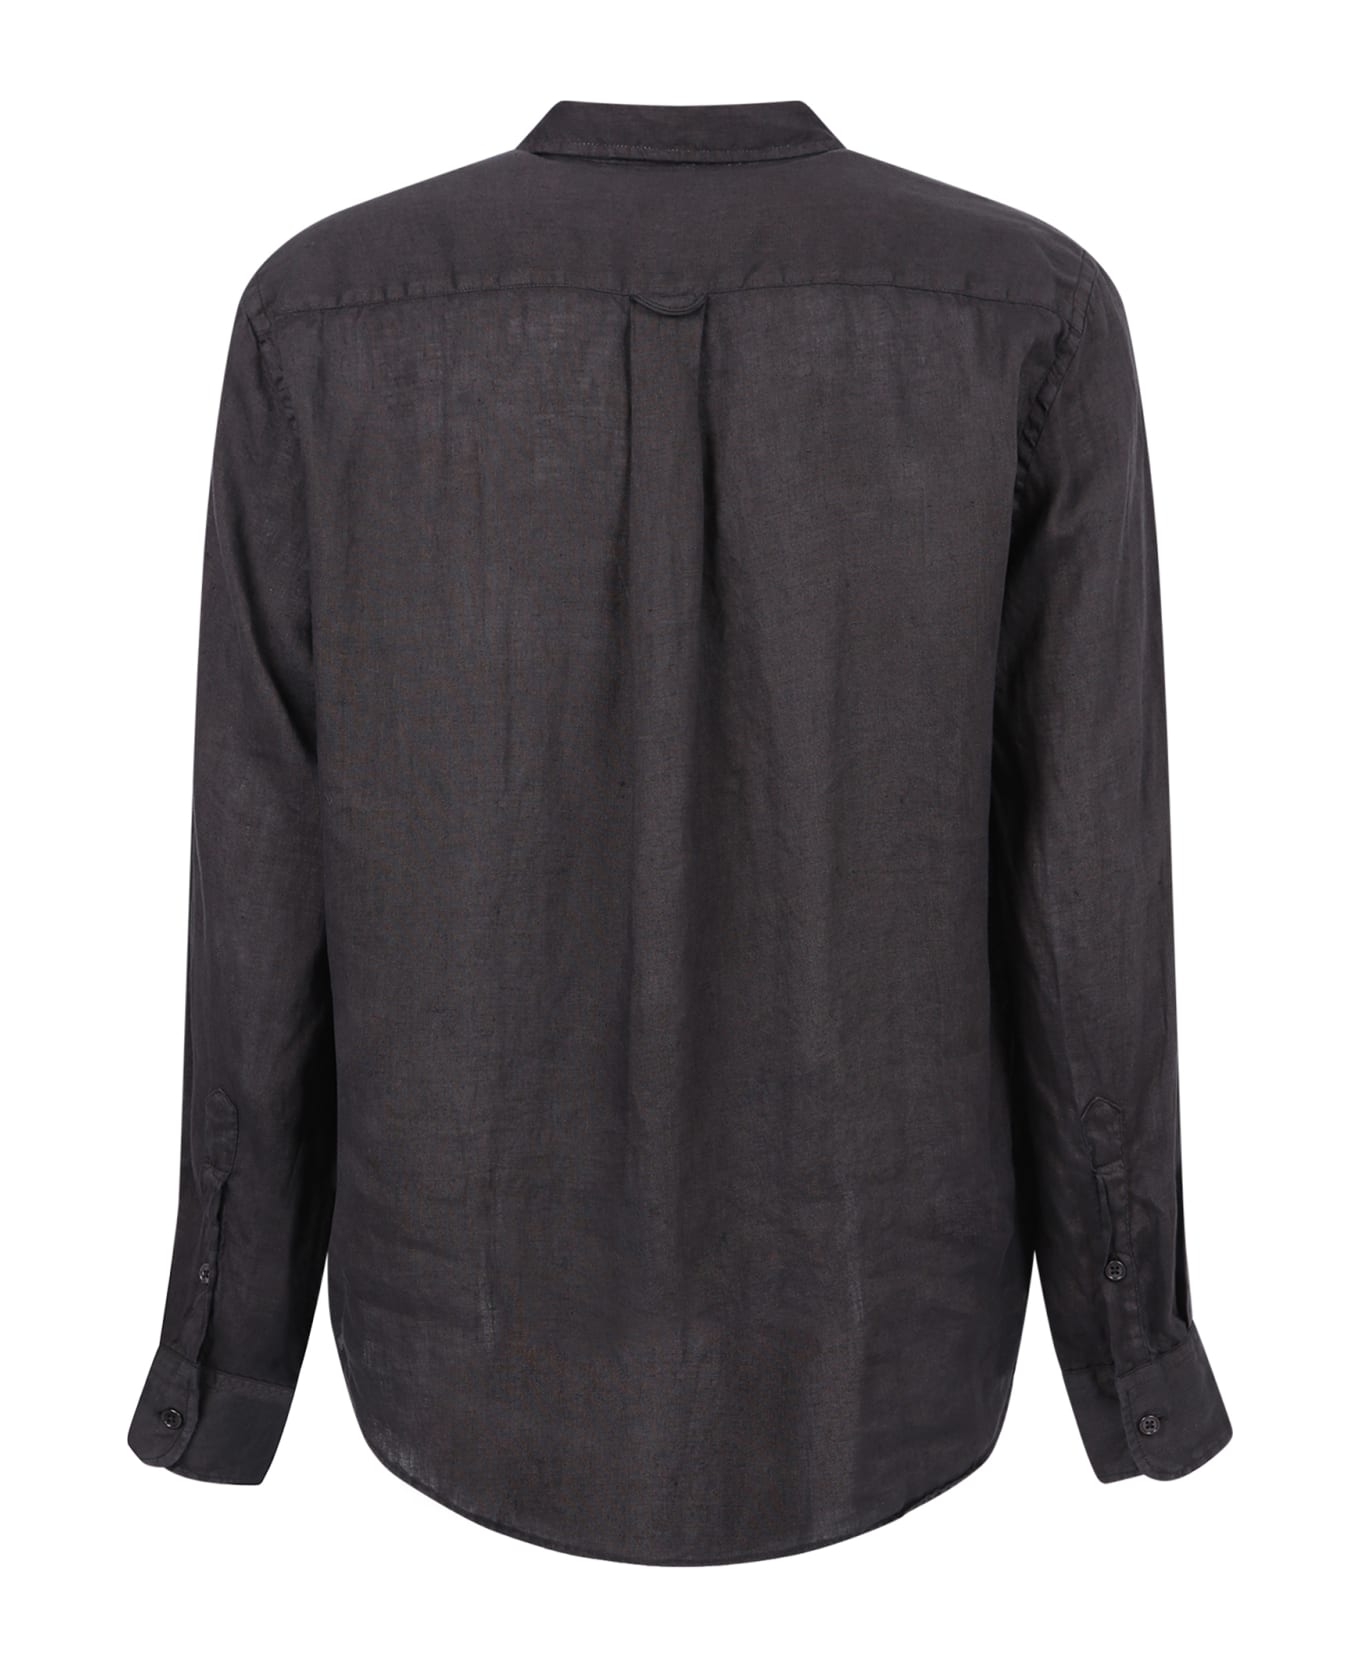 Original Vintage Style Relaxed Fit Shirt - Grey